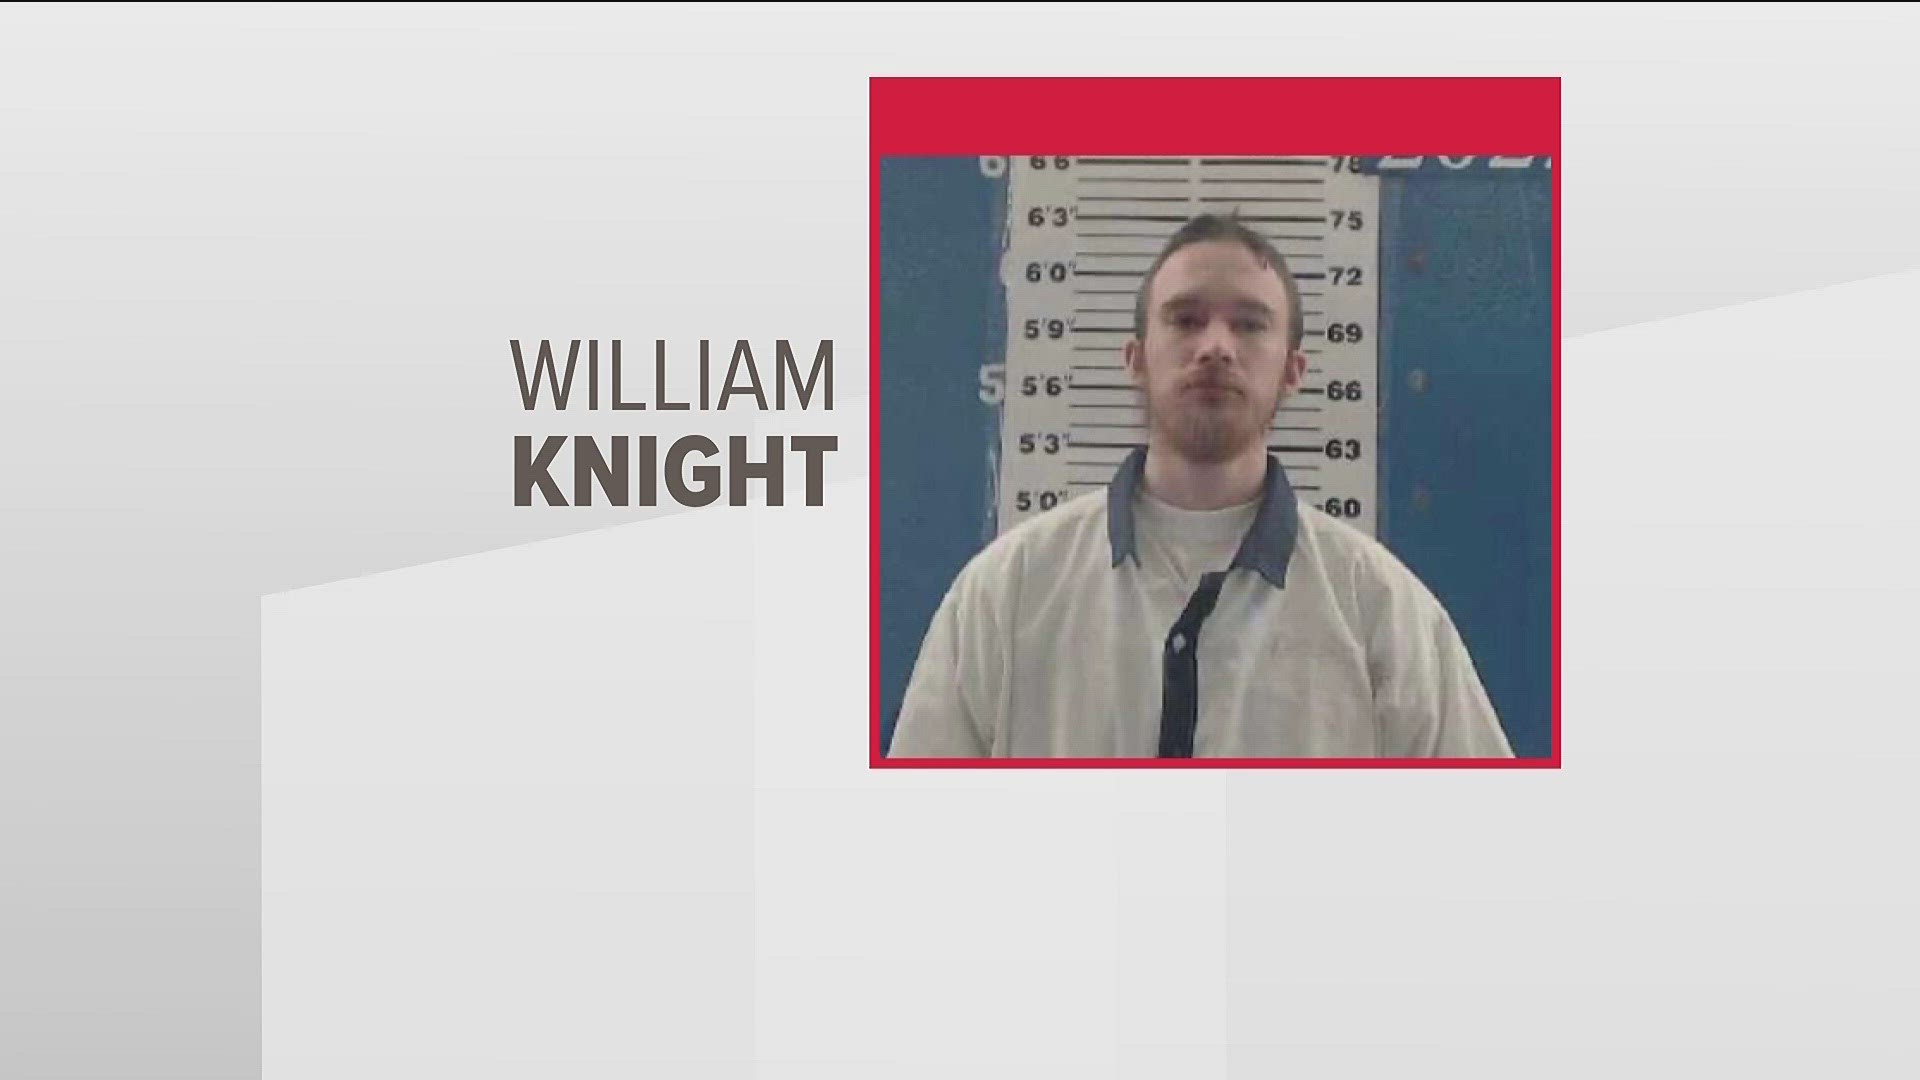 Authorities are looking for William Knight, an inmate at Baldwin State Prison. He was last seen leaving his work detail Monday.